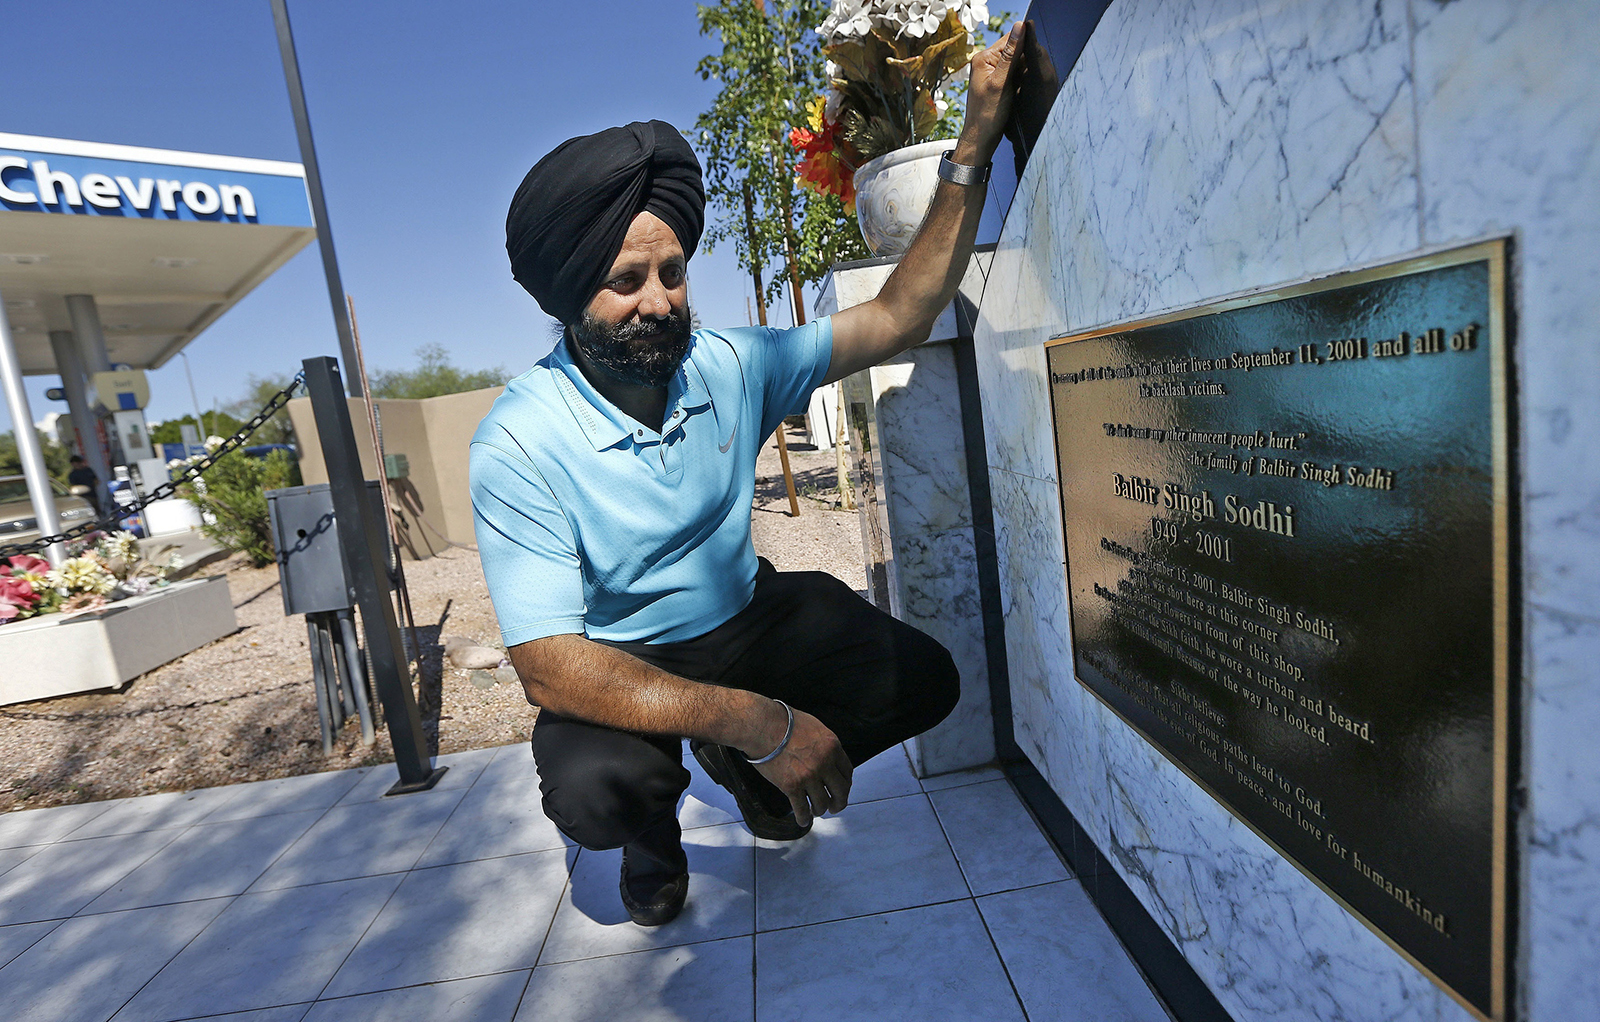 FILE - In this Aug. 19, 2016 file photo, Rana Singh Sodhi, kneels near his service station in Mesa, Ariz., next to a memorial for his brother, Balbir Singh Sodhi, who was murdered in the days after the Sept. 11 terrorist attacks. Sodhi, a Sikh American was killed at his Arizona gas station four days following the Sept. 11 attacks by a man who announced he was "going to go out and shoot some towel-heads" and mistook him for an Arab Muslim. (AP Photo/Ross D. Franklin, File)